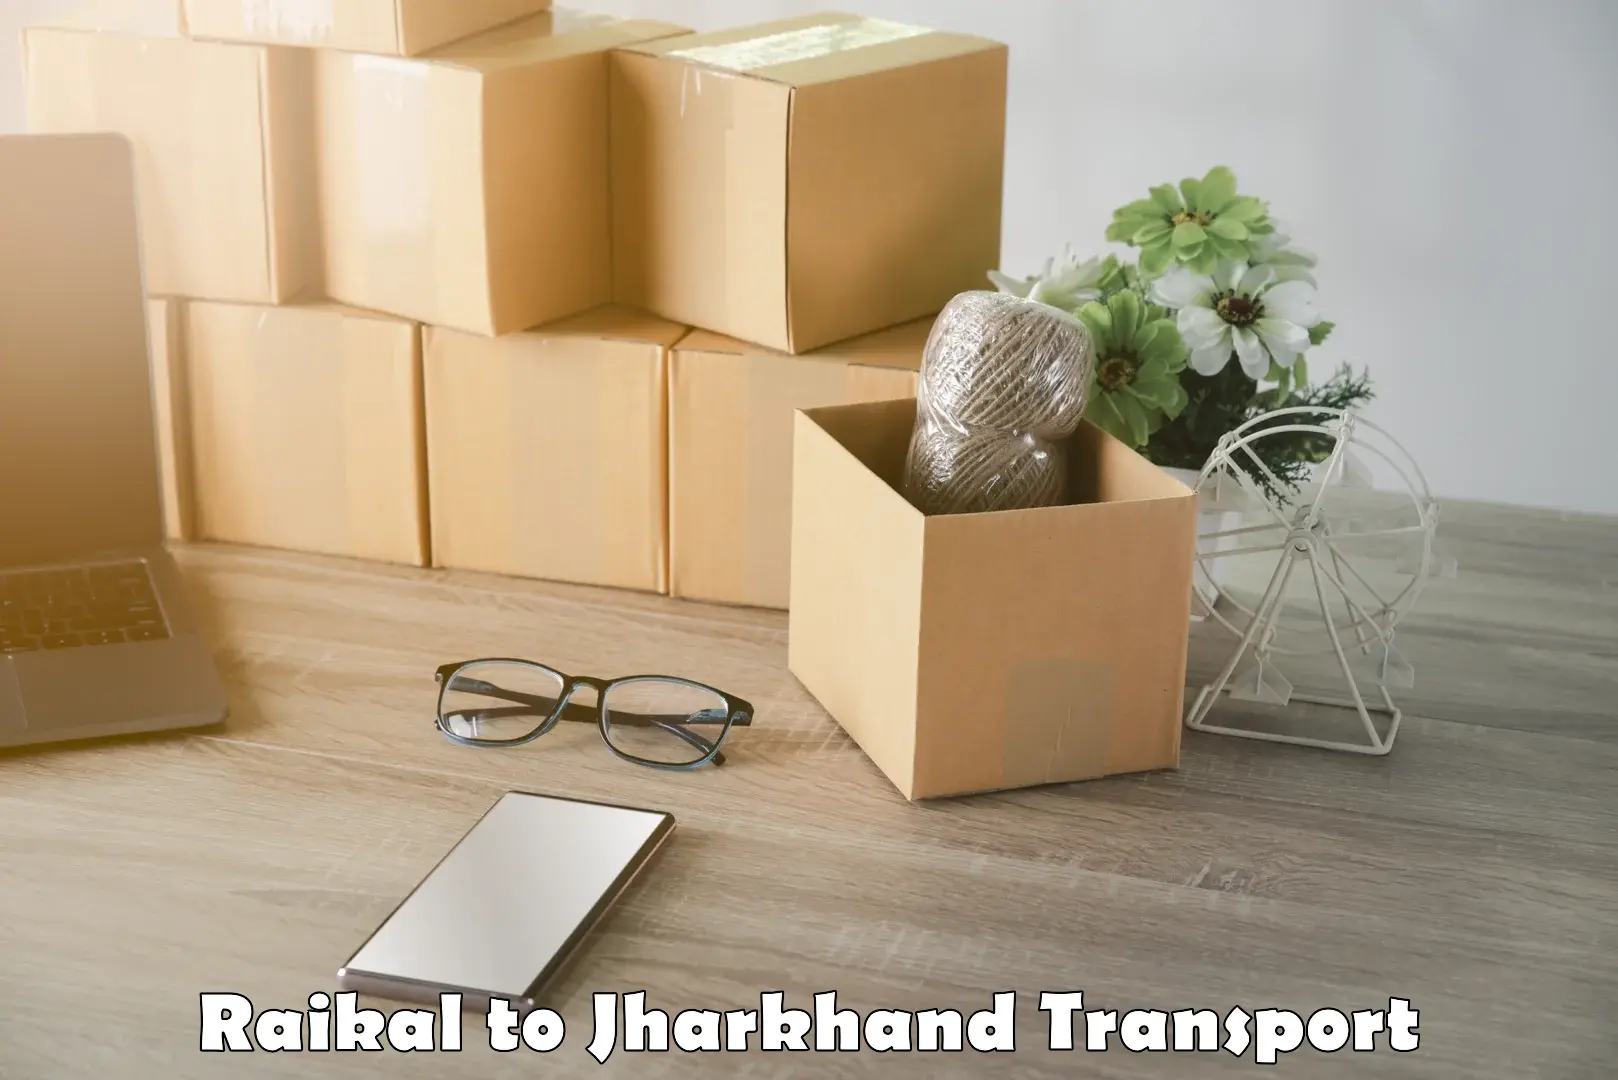 Vehicle transport services in Raikal to Chouparan